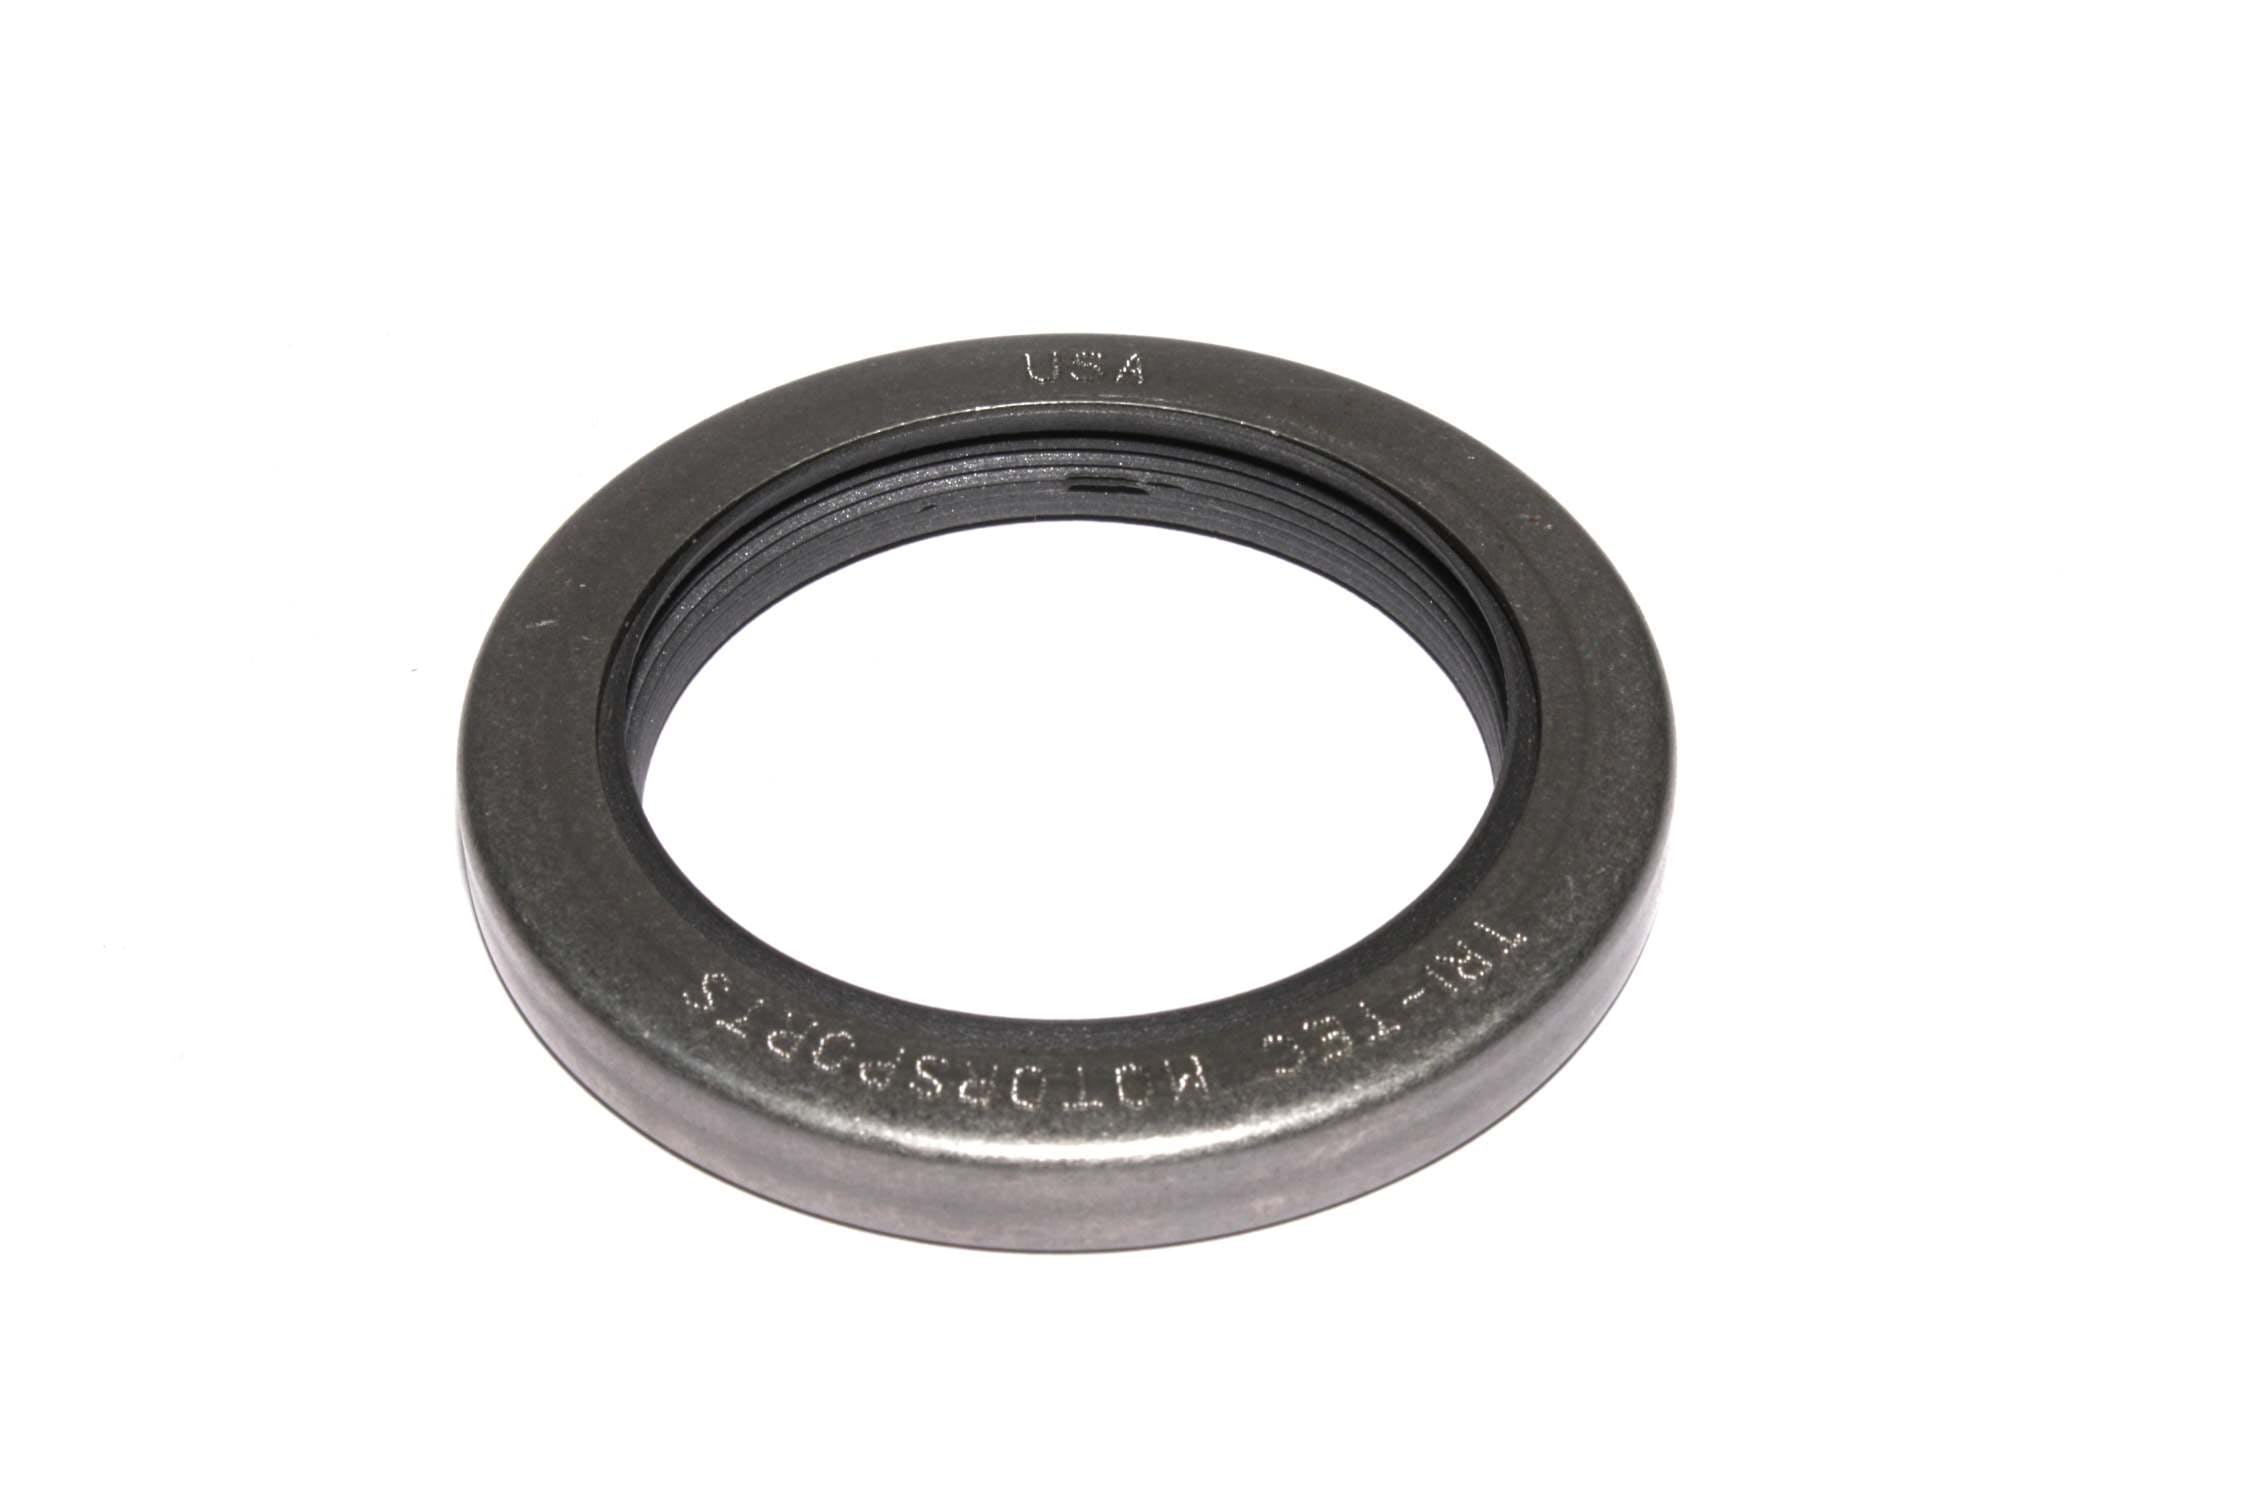 Competition Cams 6502LS-1 Hi-Tech Belt Drive System Lower Replacement Oil Seal